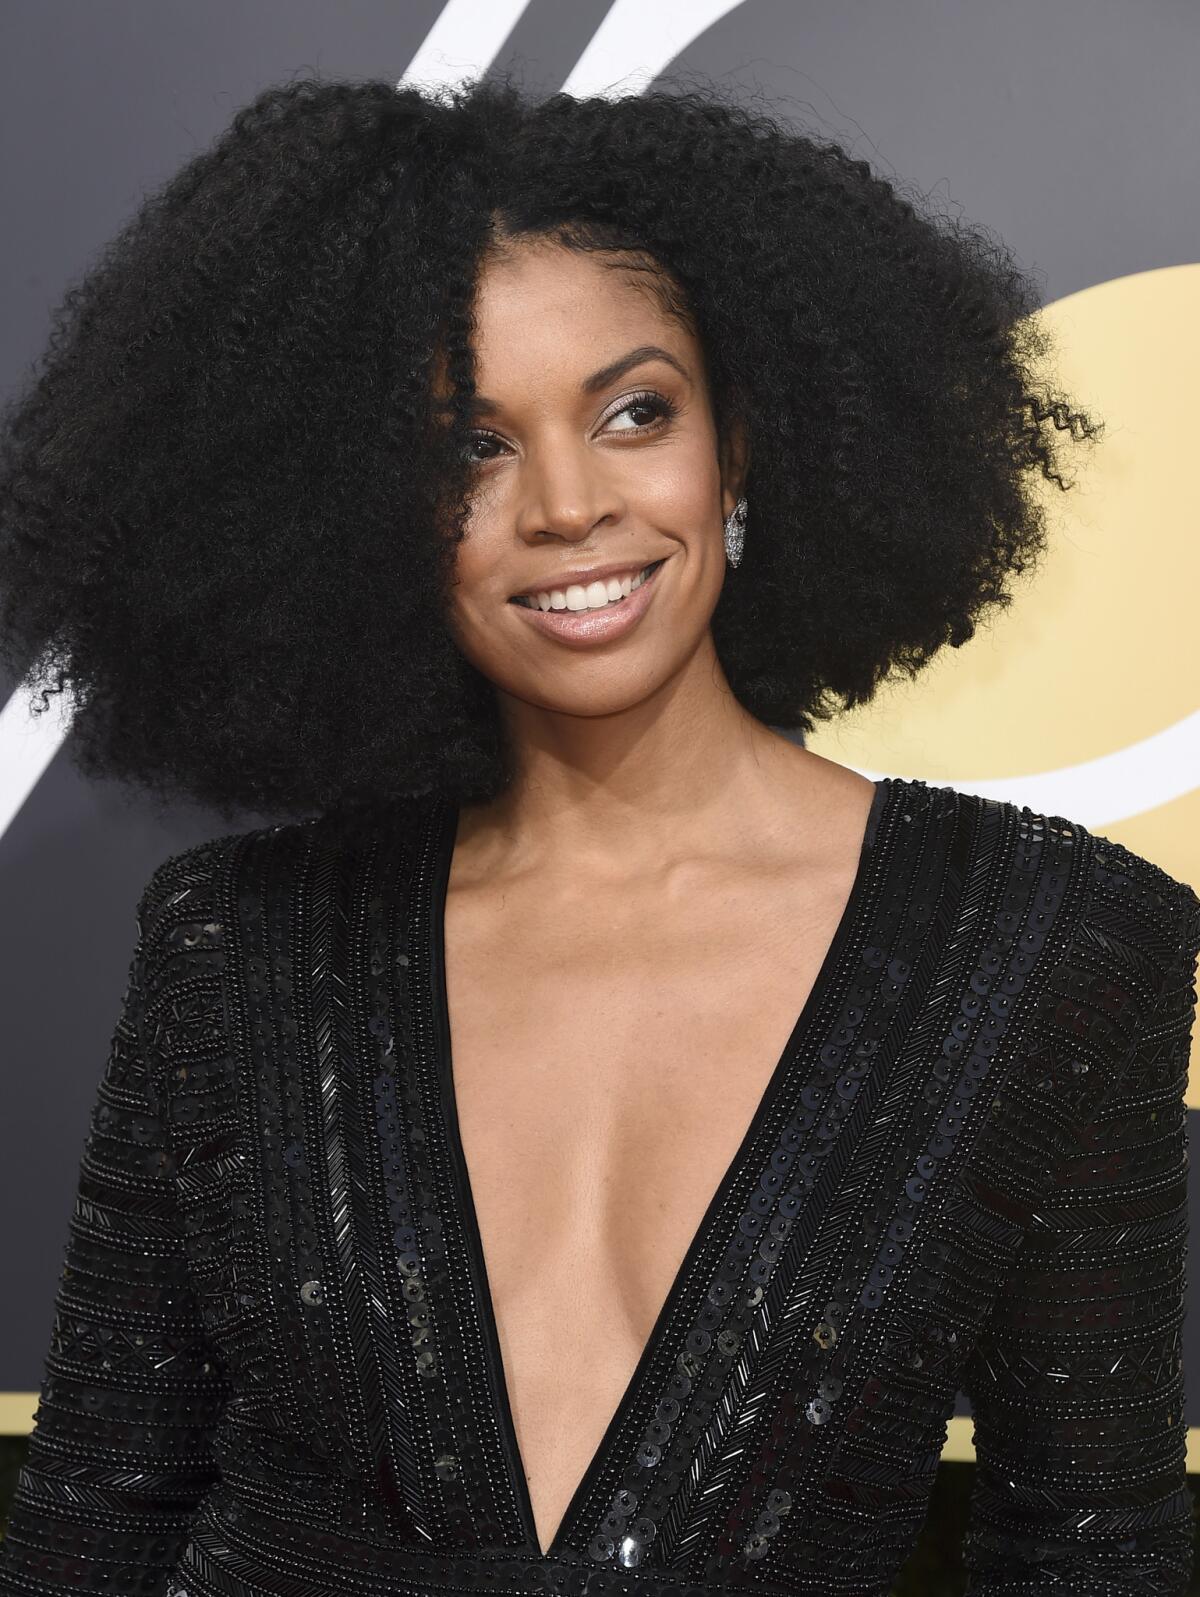 "This Is Us" star Susan Kelechi Watson arrives at the 75th Golden Globe Awards at the Beverly Hilton.